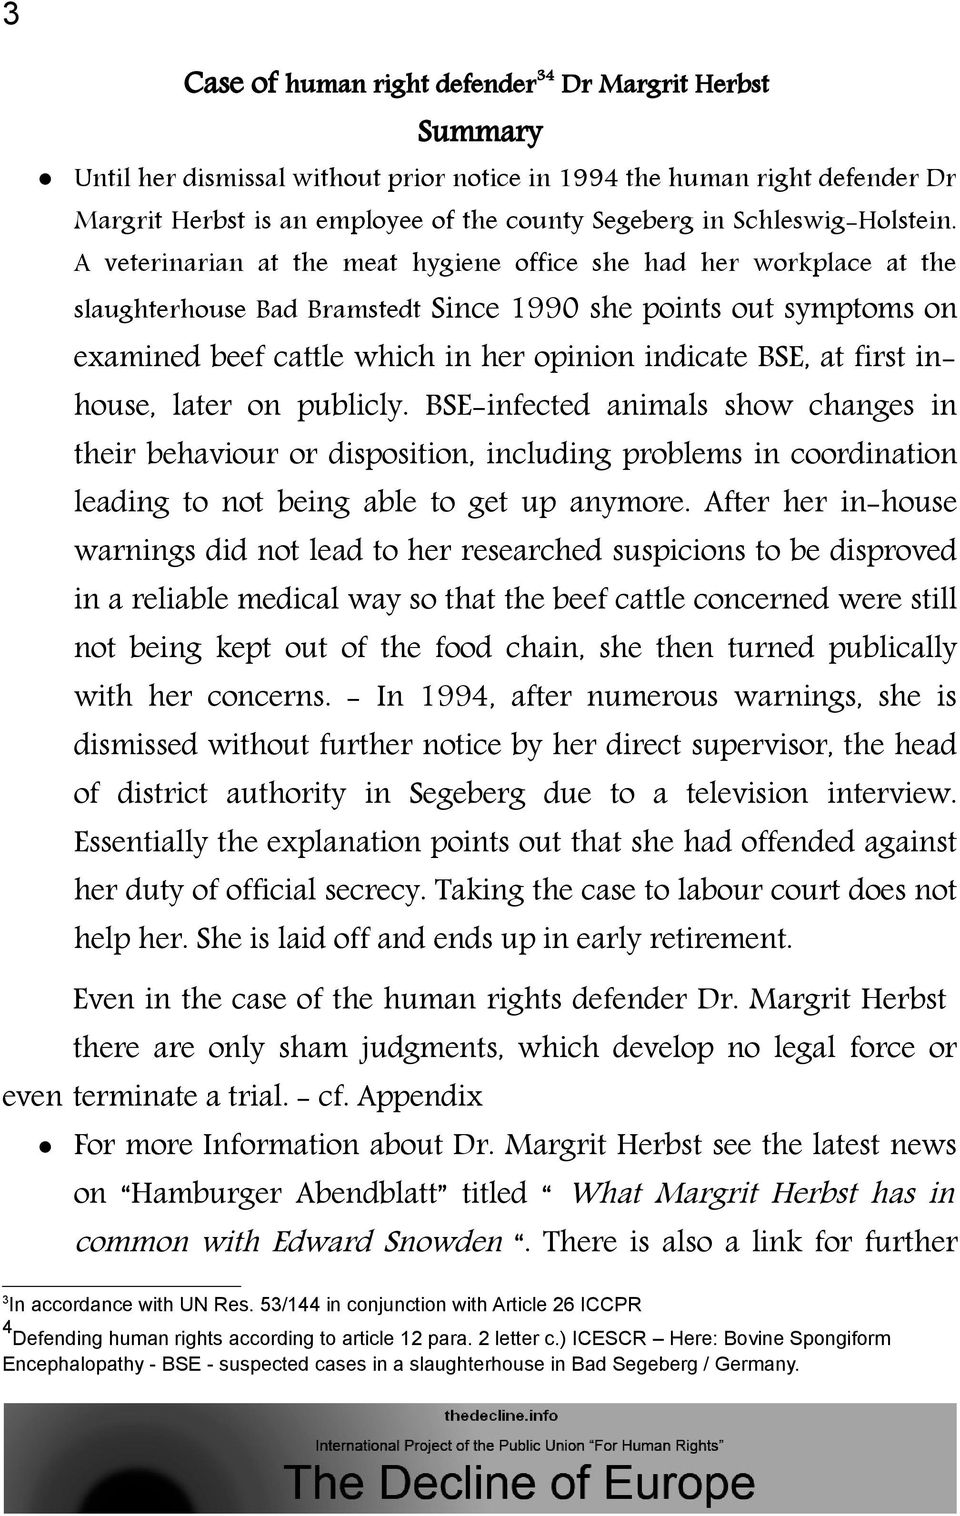 A veterinarian at the meat hygiene office she had her workplace at the slaughterhouse Bad Bramstedt Since 1990 she points out symptoms on examined beef cattle which in her opinion indicate BSE, at